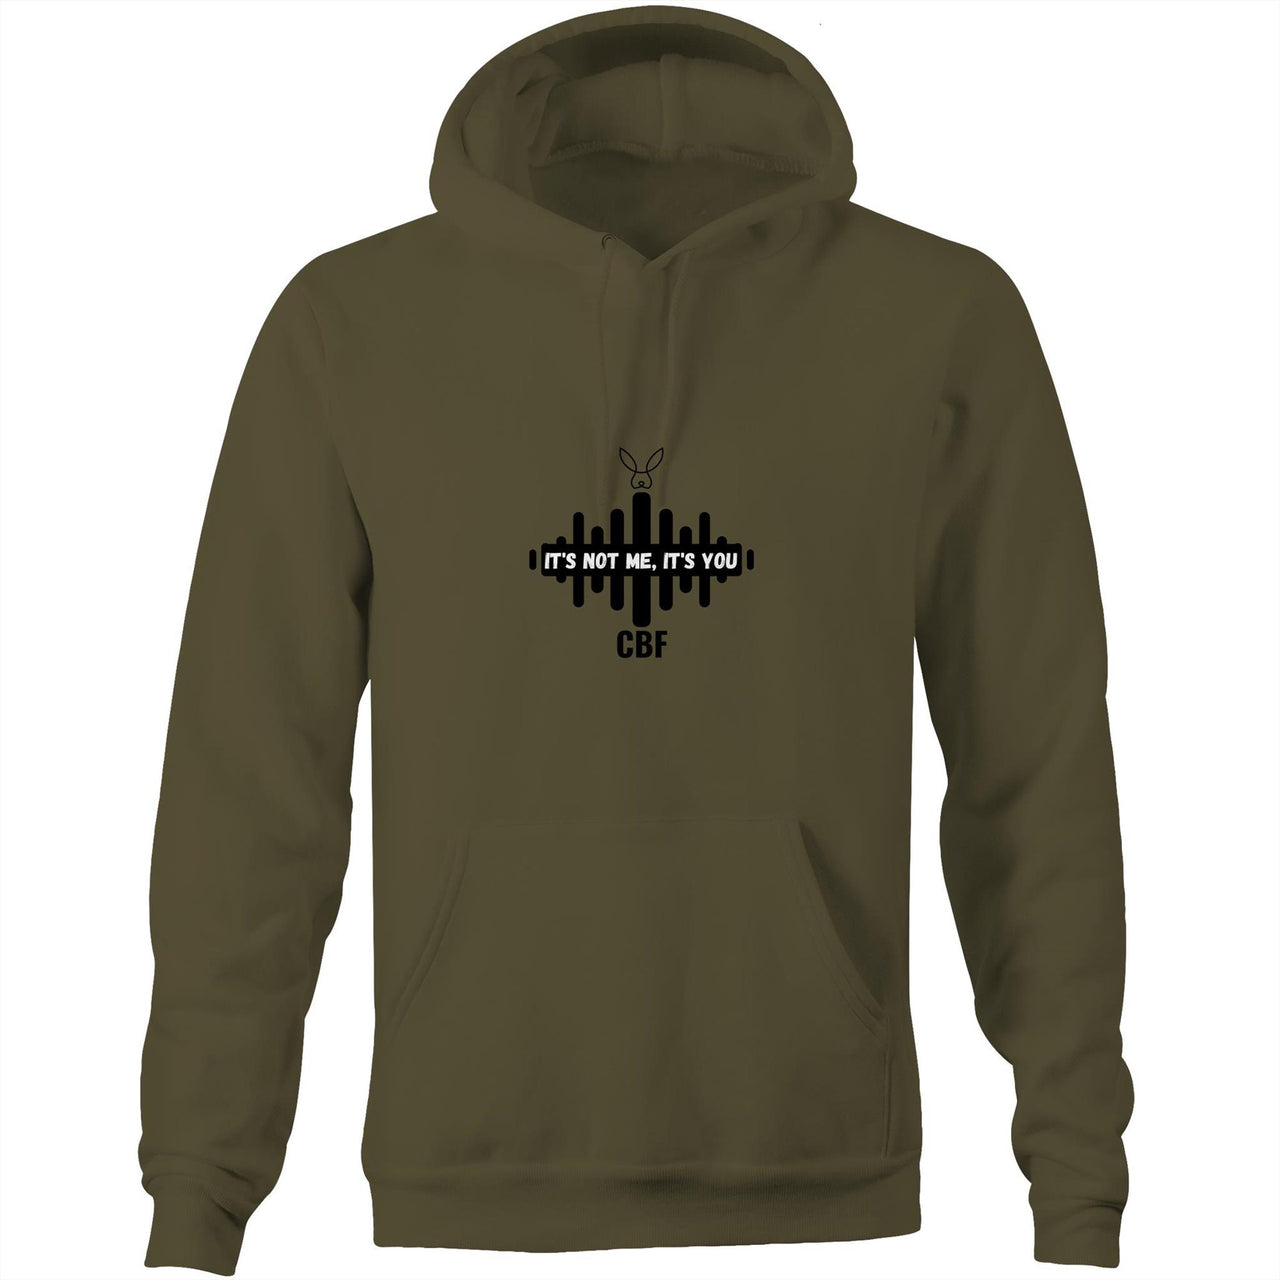 Not me It's You Pocket Hoodie Sweatshirt by CBF Clothing in Olive Green